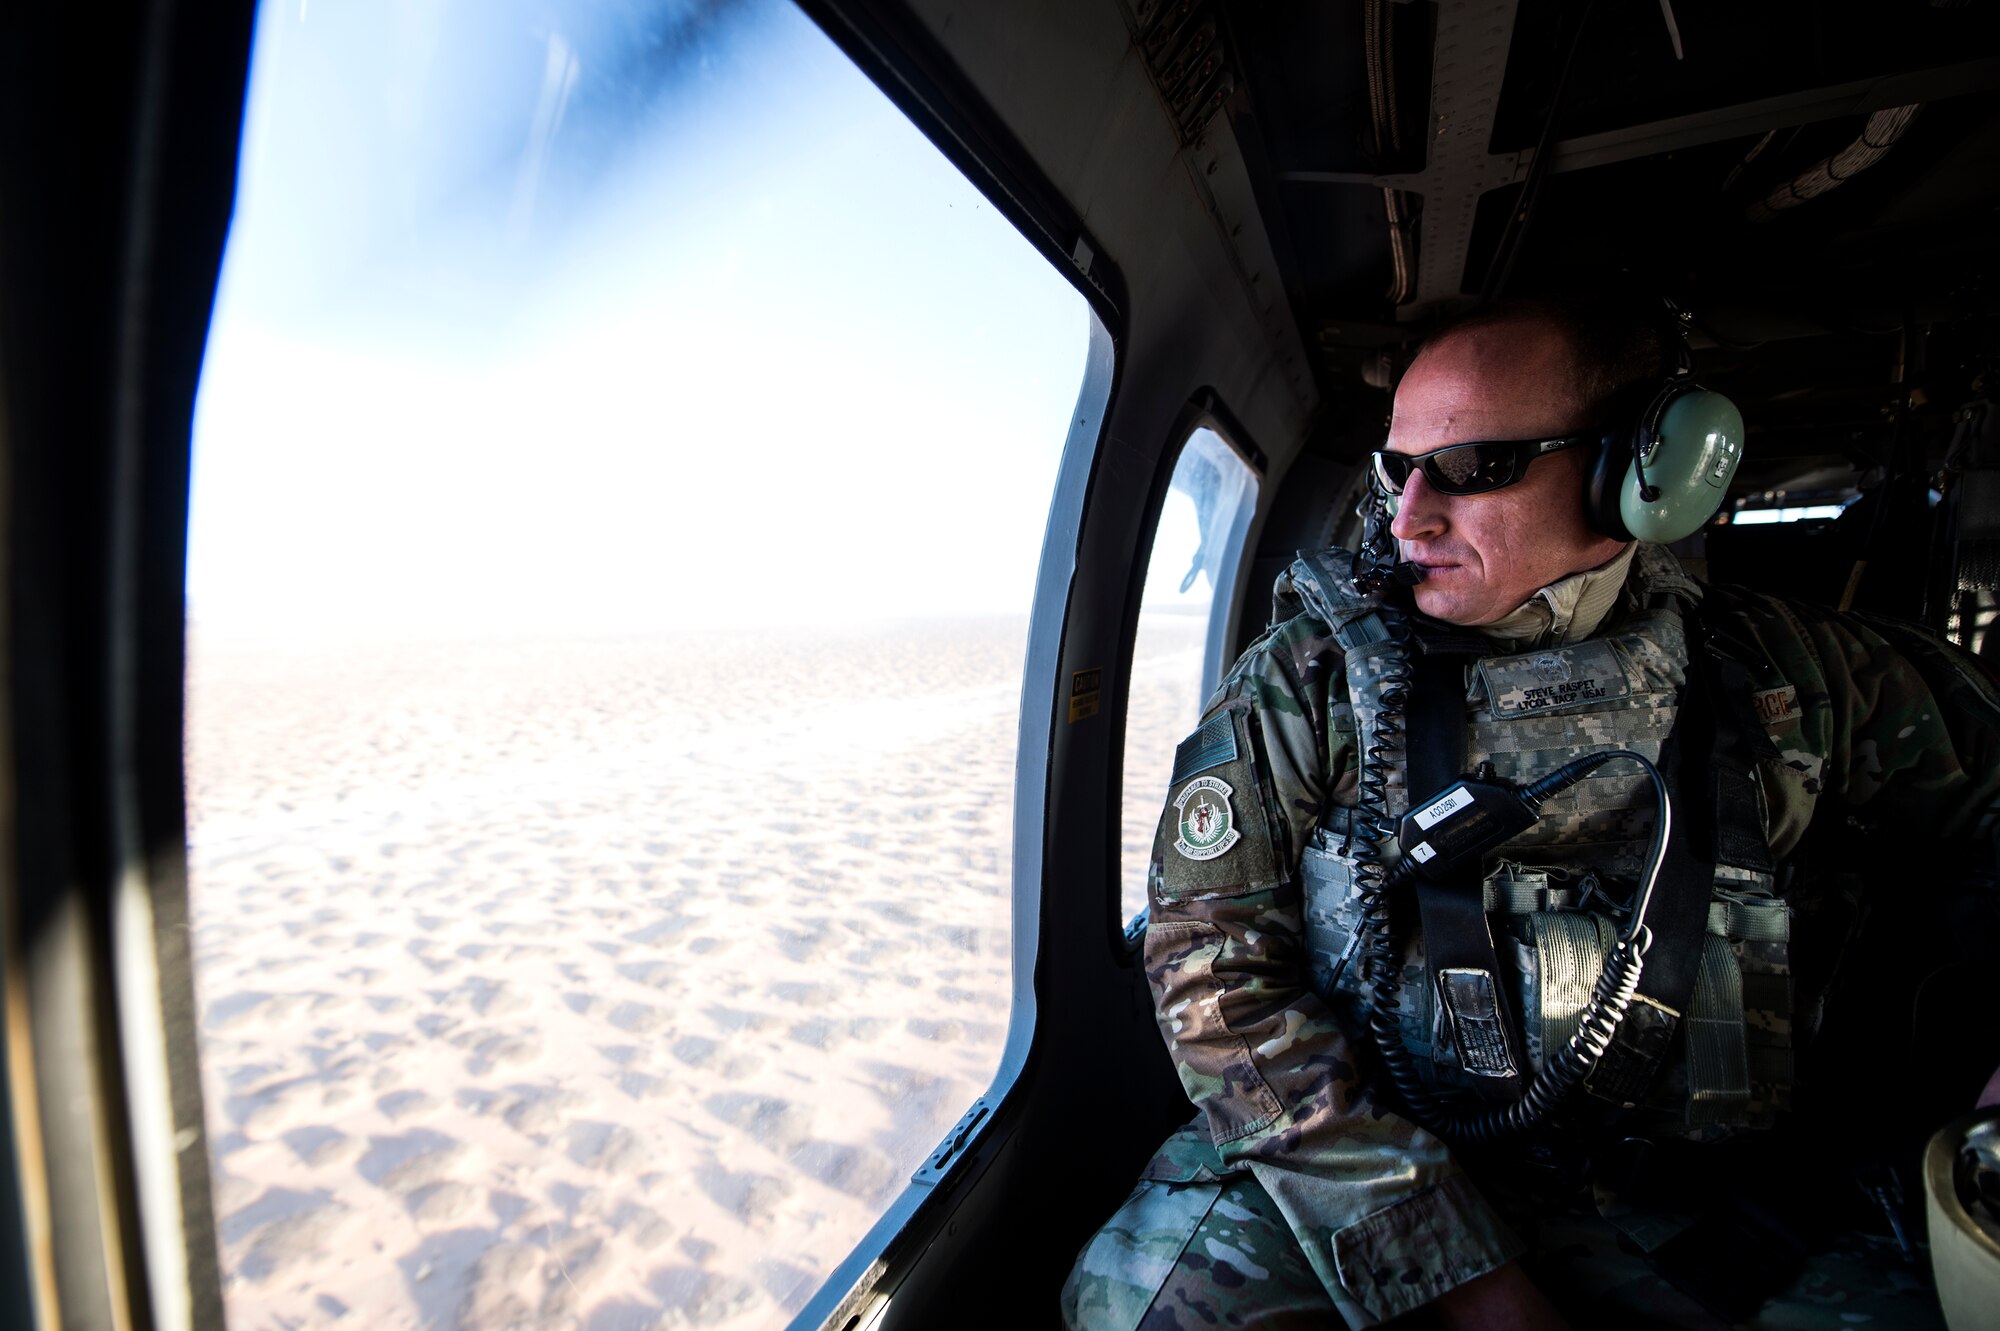 U.S. Air Force Lt. Col. Steve Raspet, 7th Air Support Operations Squadron commander, examines the sky inside of a U.S. Army Sikorsky UH-60 Black Hawk while traveling to the Oro Grande Training Complex for the joint exercise, Iron Focus, Feb. 4, 2016. Iron Focus is held at least twice a year dependent upon the rotation of each Army brigade. (U.S. Air Force photo by Senior Airman Olivia Dominique/Released)